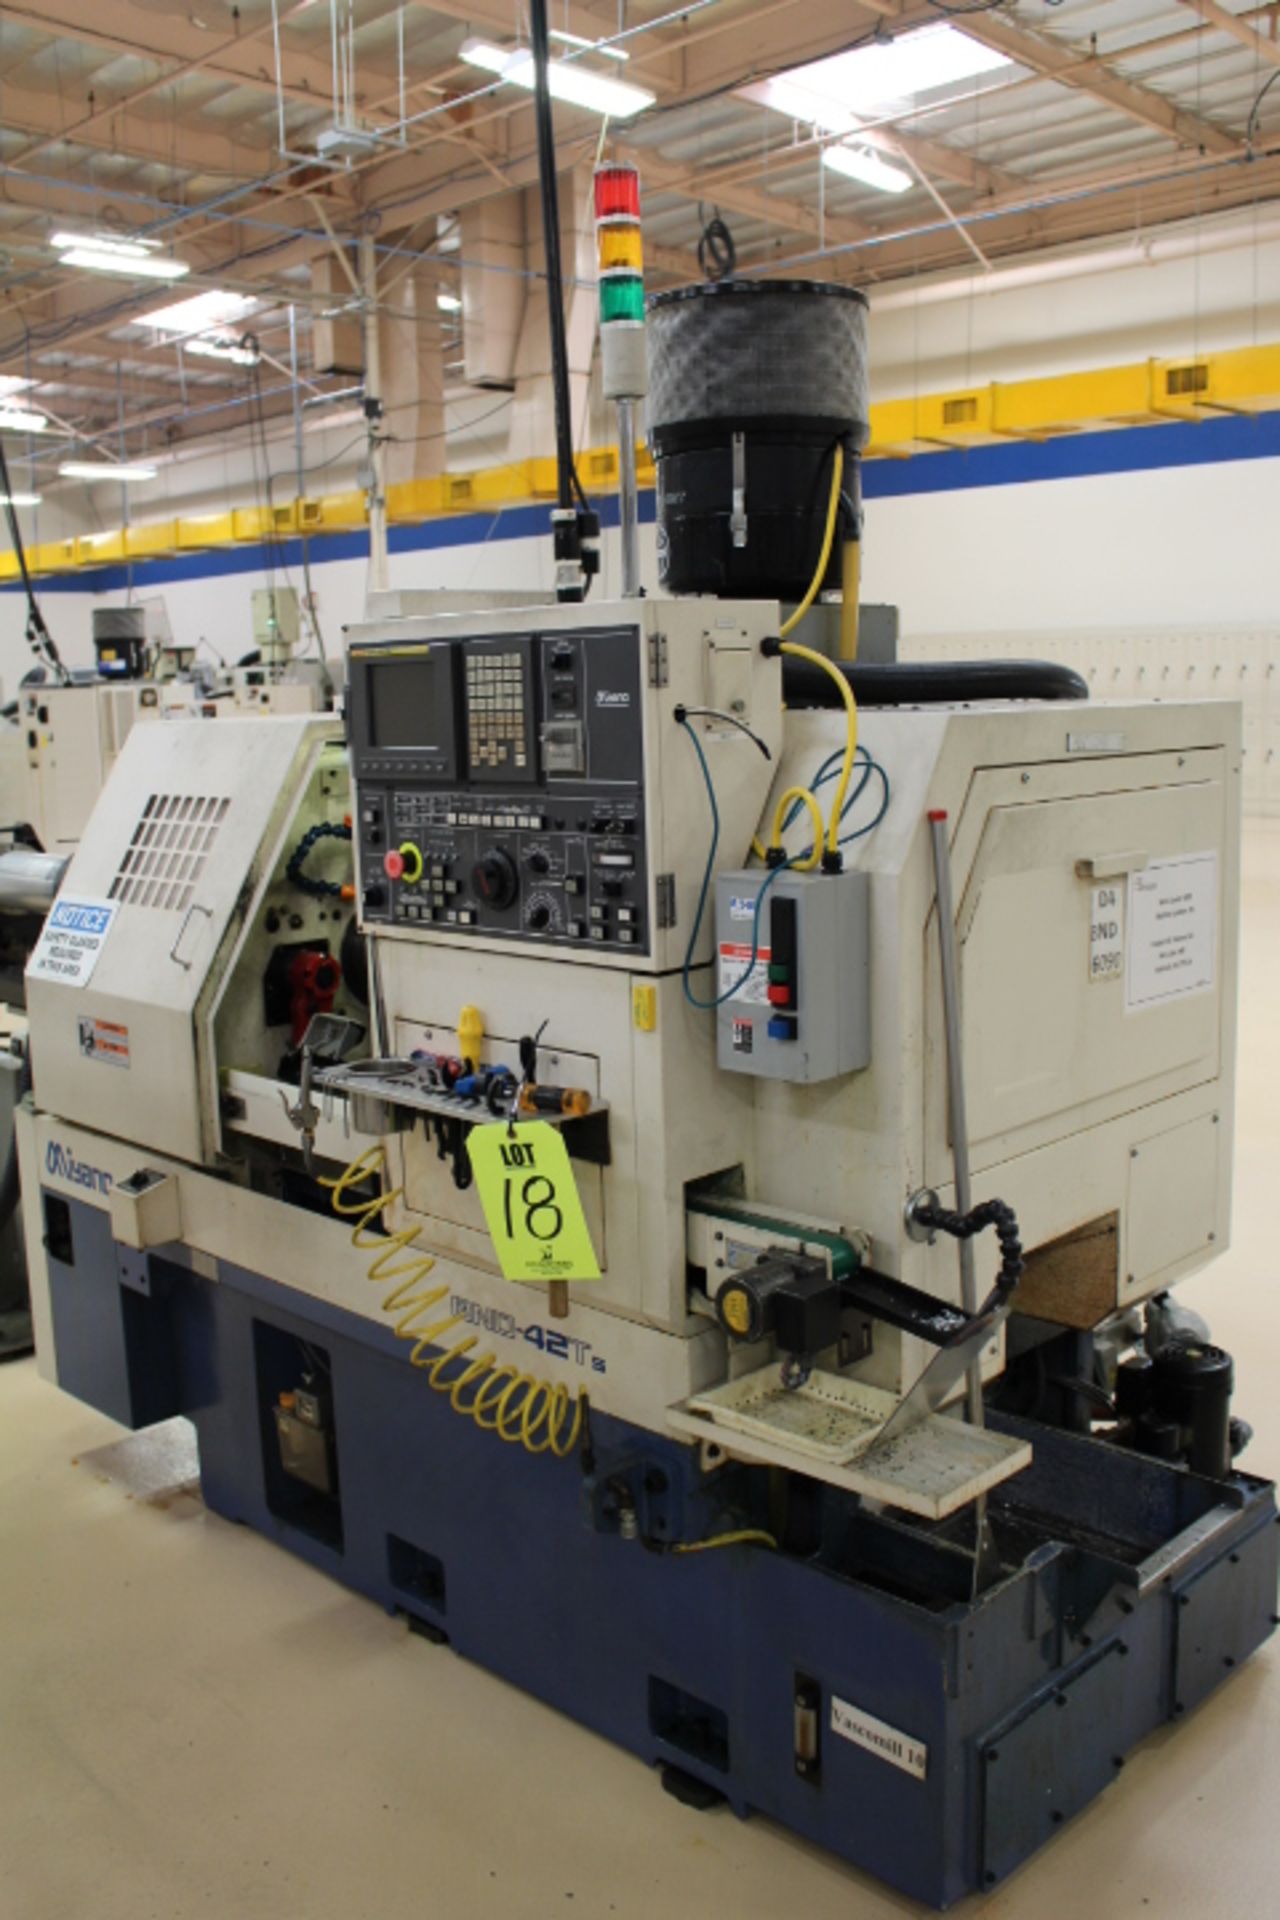 MIYANO BND-42T5 CNC TURNING CENTER, FANUC SERIES 21i-TB CONTROL, 5,000 RPM MAX SPINDLE SPEED, 12MM-